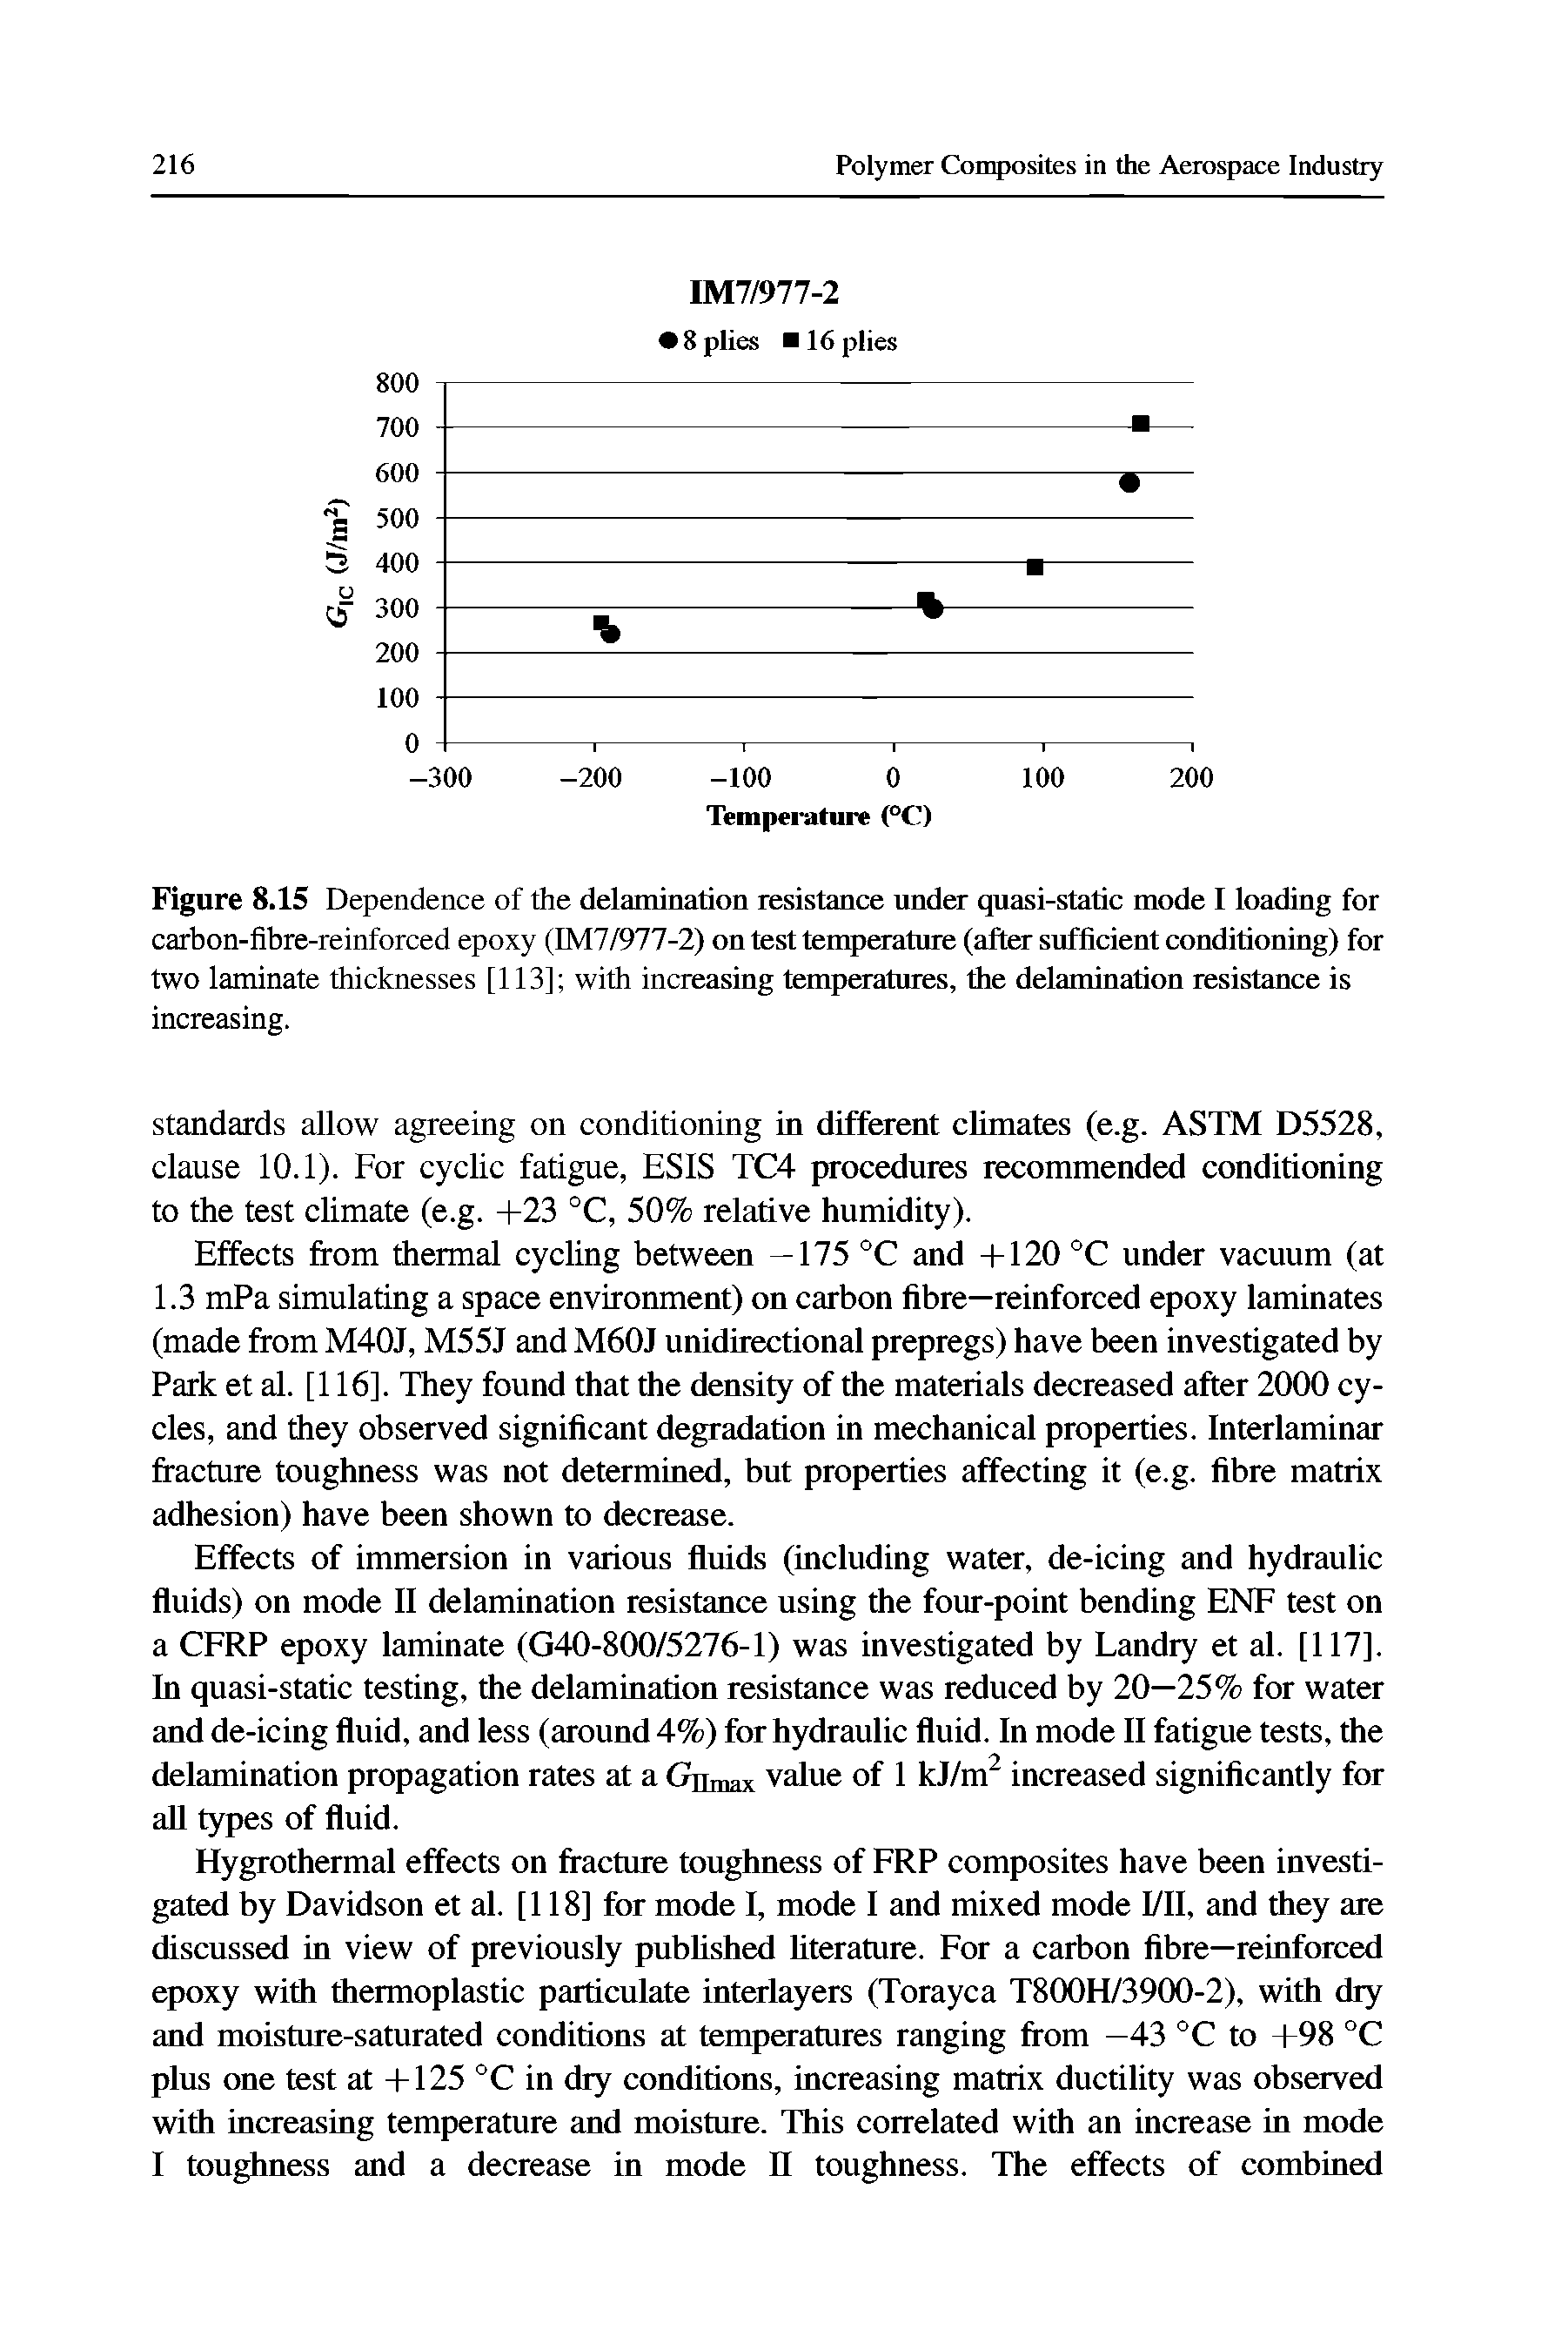 Figure 8.15 Dependence of the delamination resistance under quasi-static mode I loading for carbon-fibre-reinforced epoxy (IM7/977-2) on test temperature (after sufficient conditioning) for two laminate thicknesses [113] with increasing temperatures, the delamination resistance is increasing.